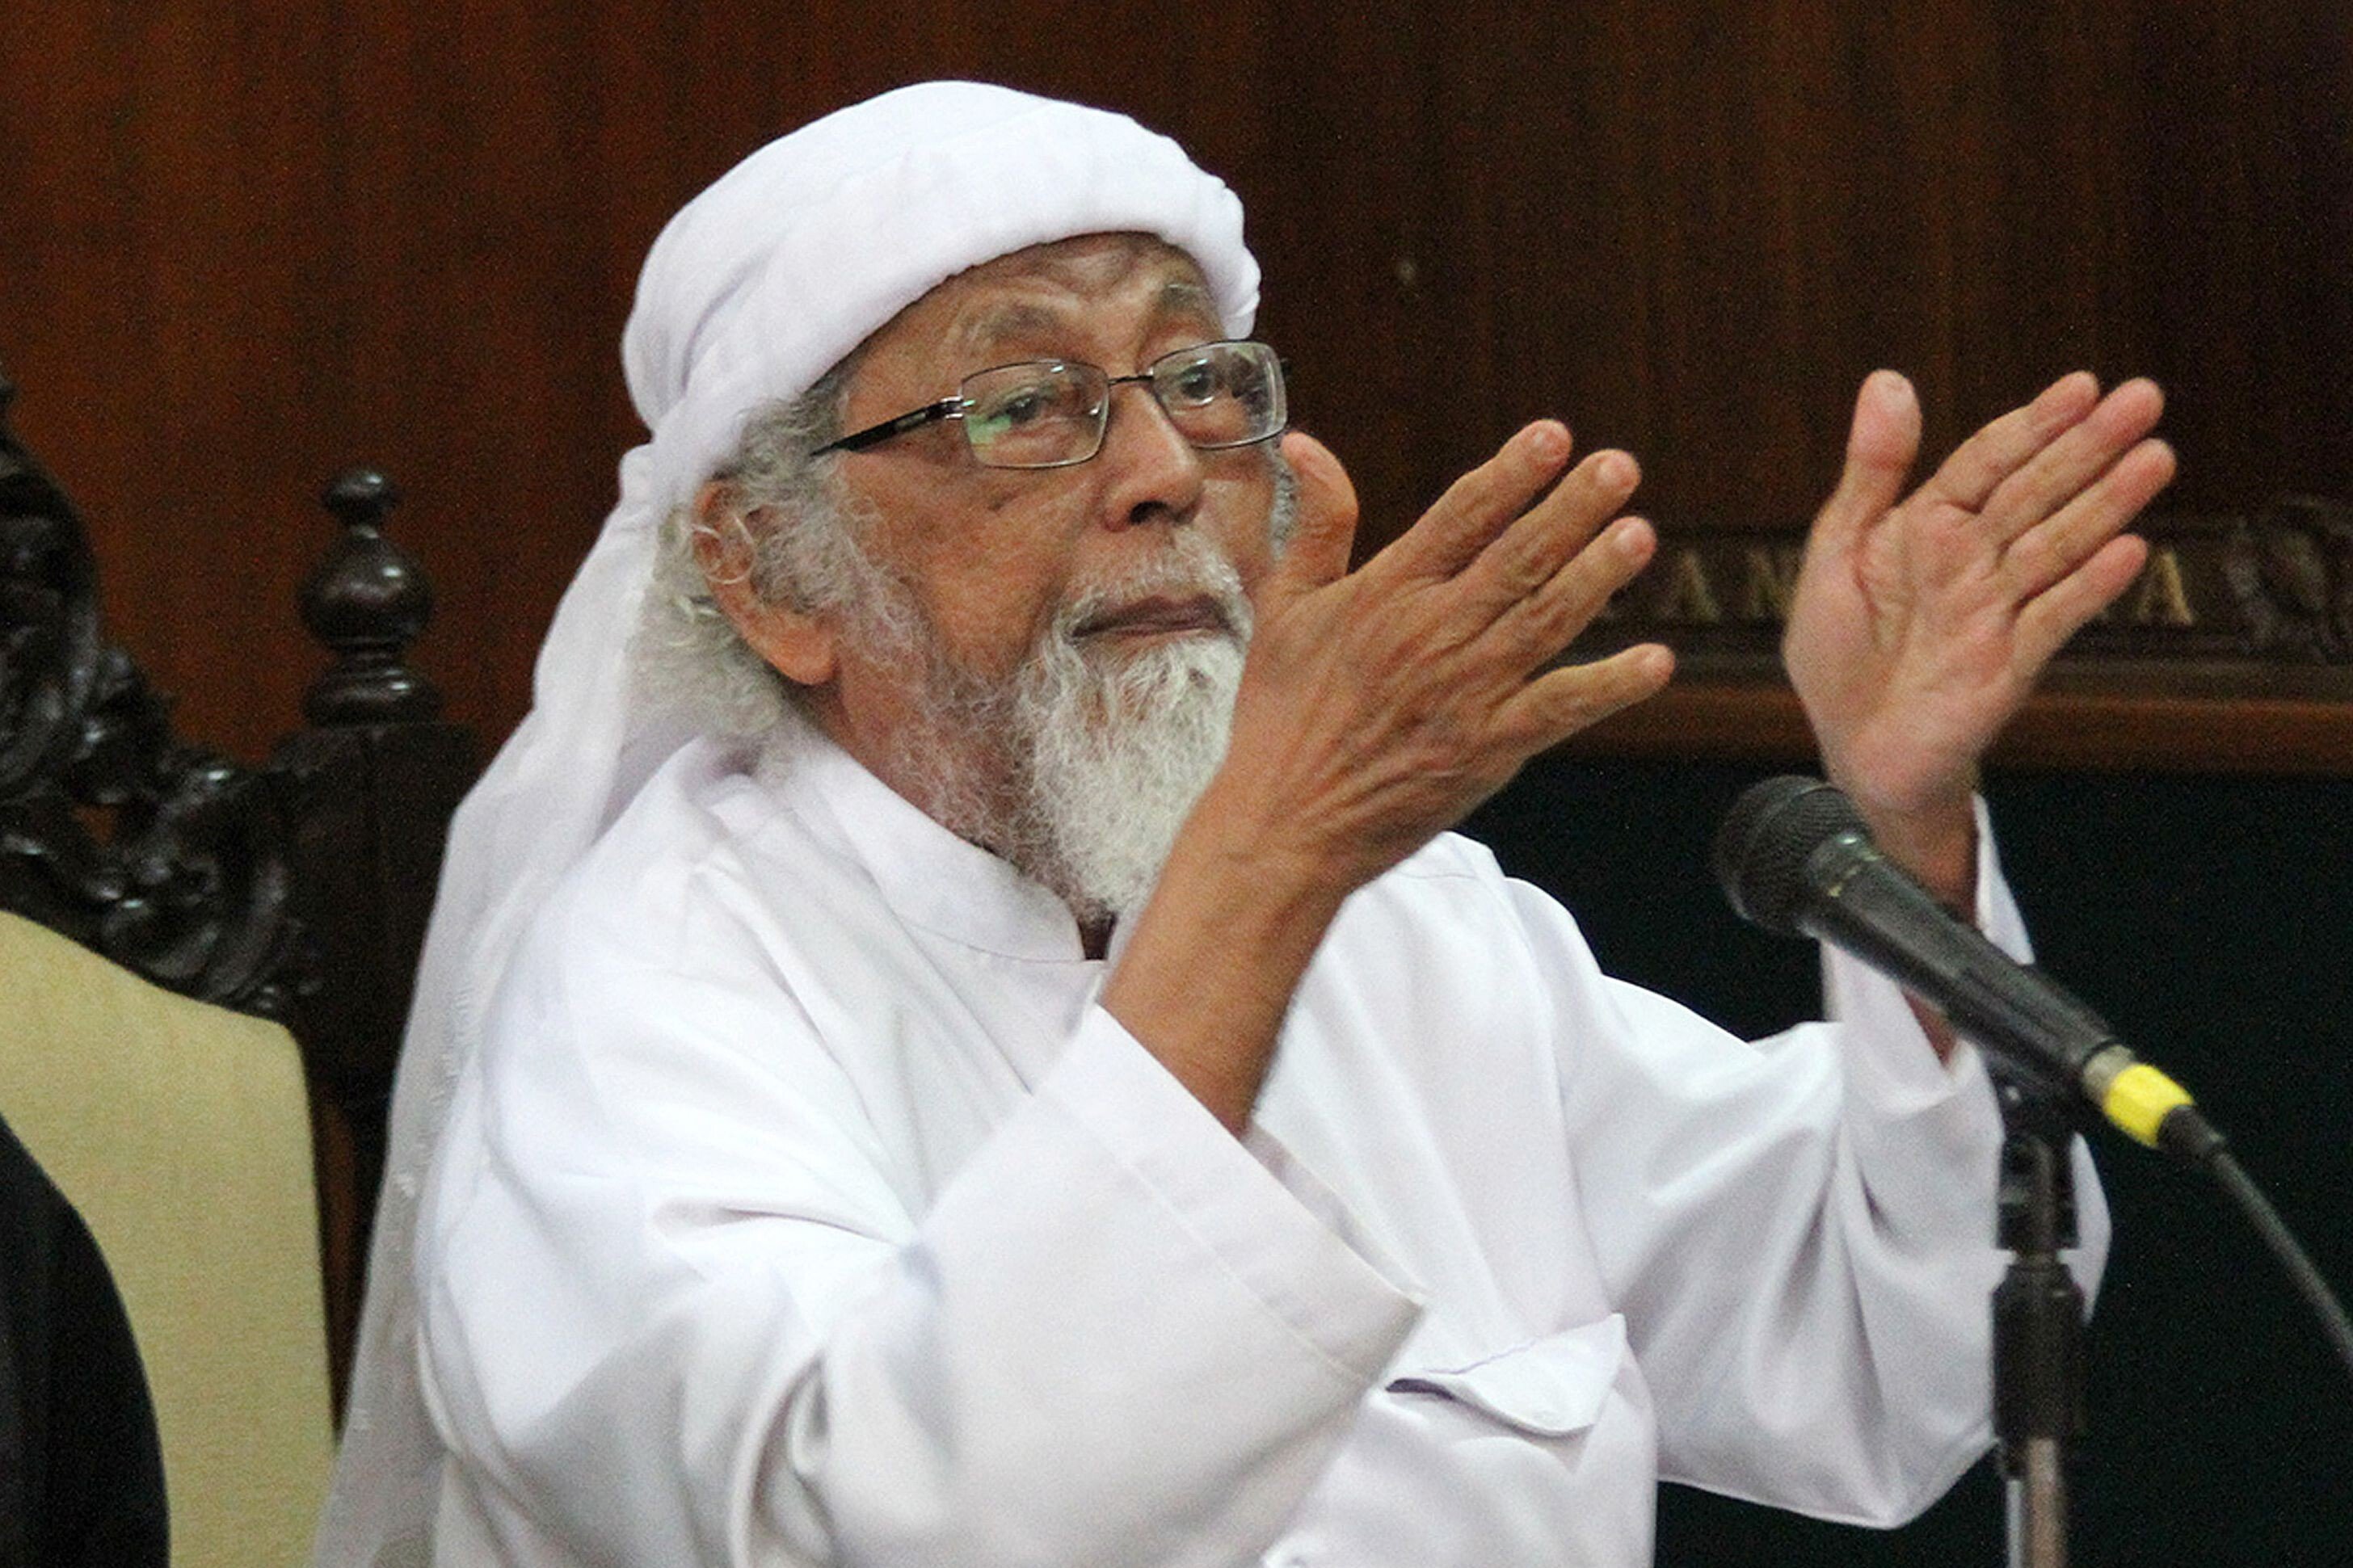 Indonesian cleric Abu Bakar Bashir will be released from prison this week. Photo: AFP